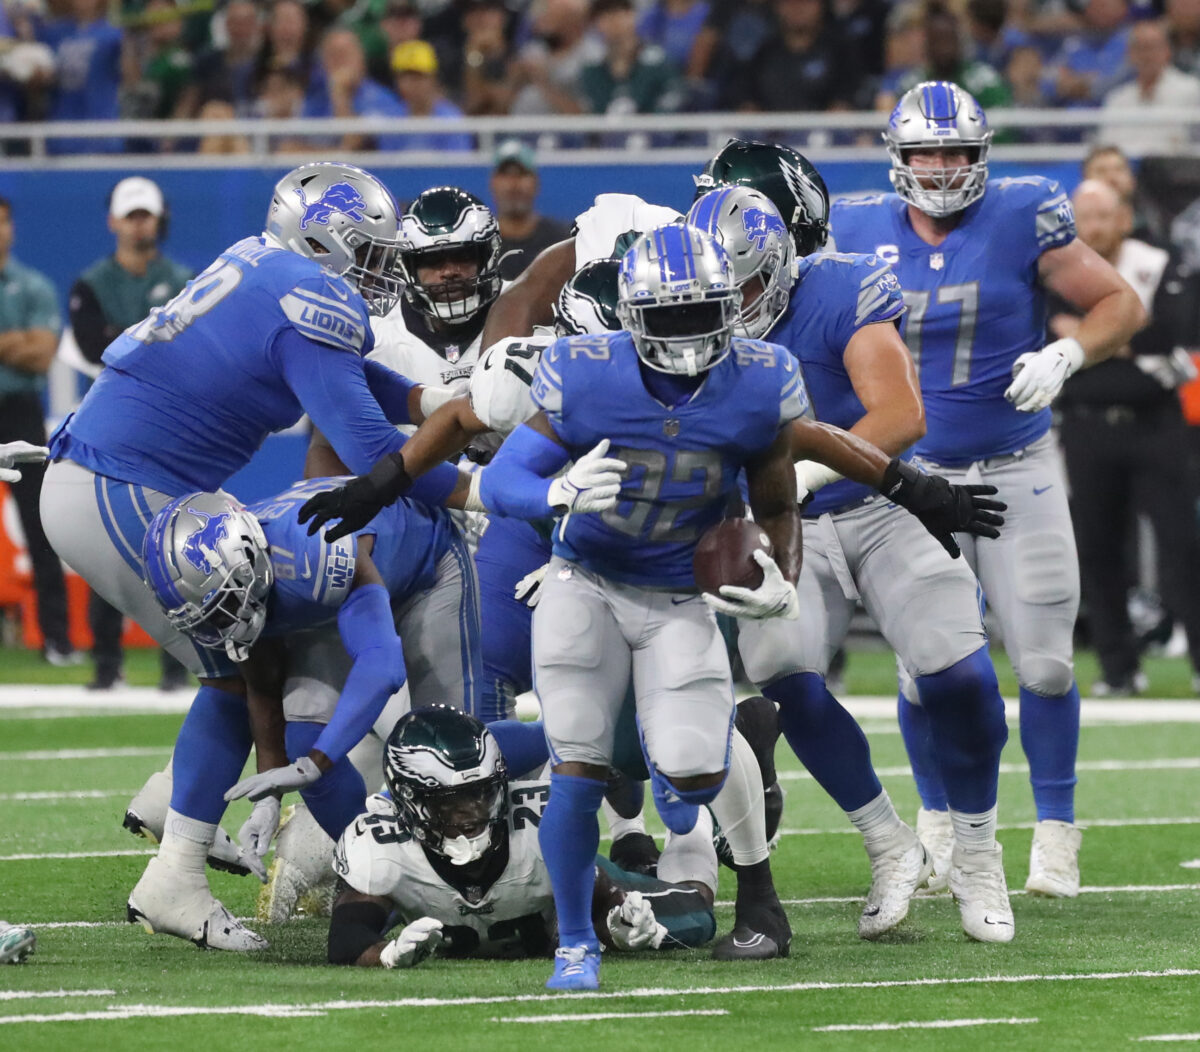 Breaking down just how good the Lions run game has been through Week 2